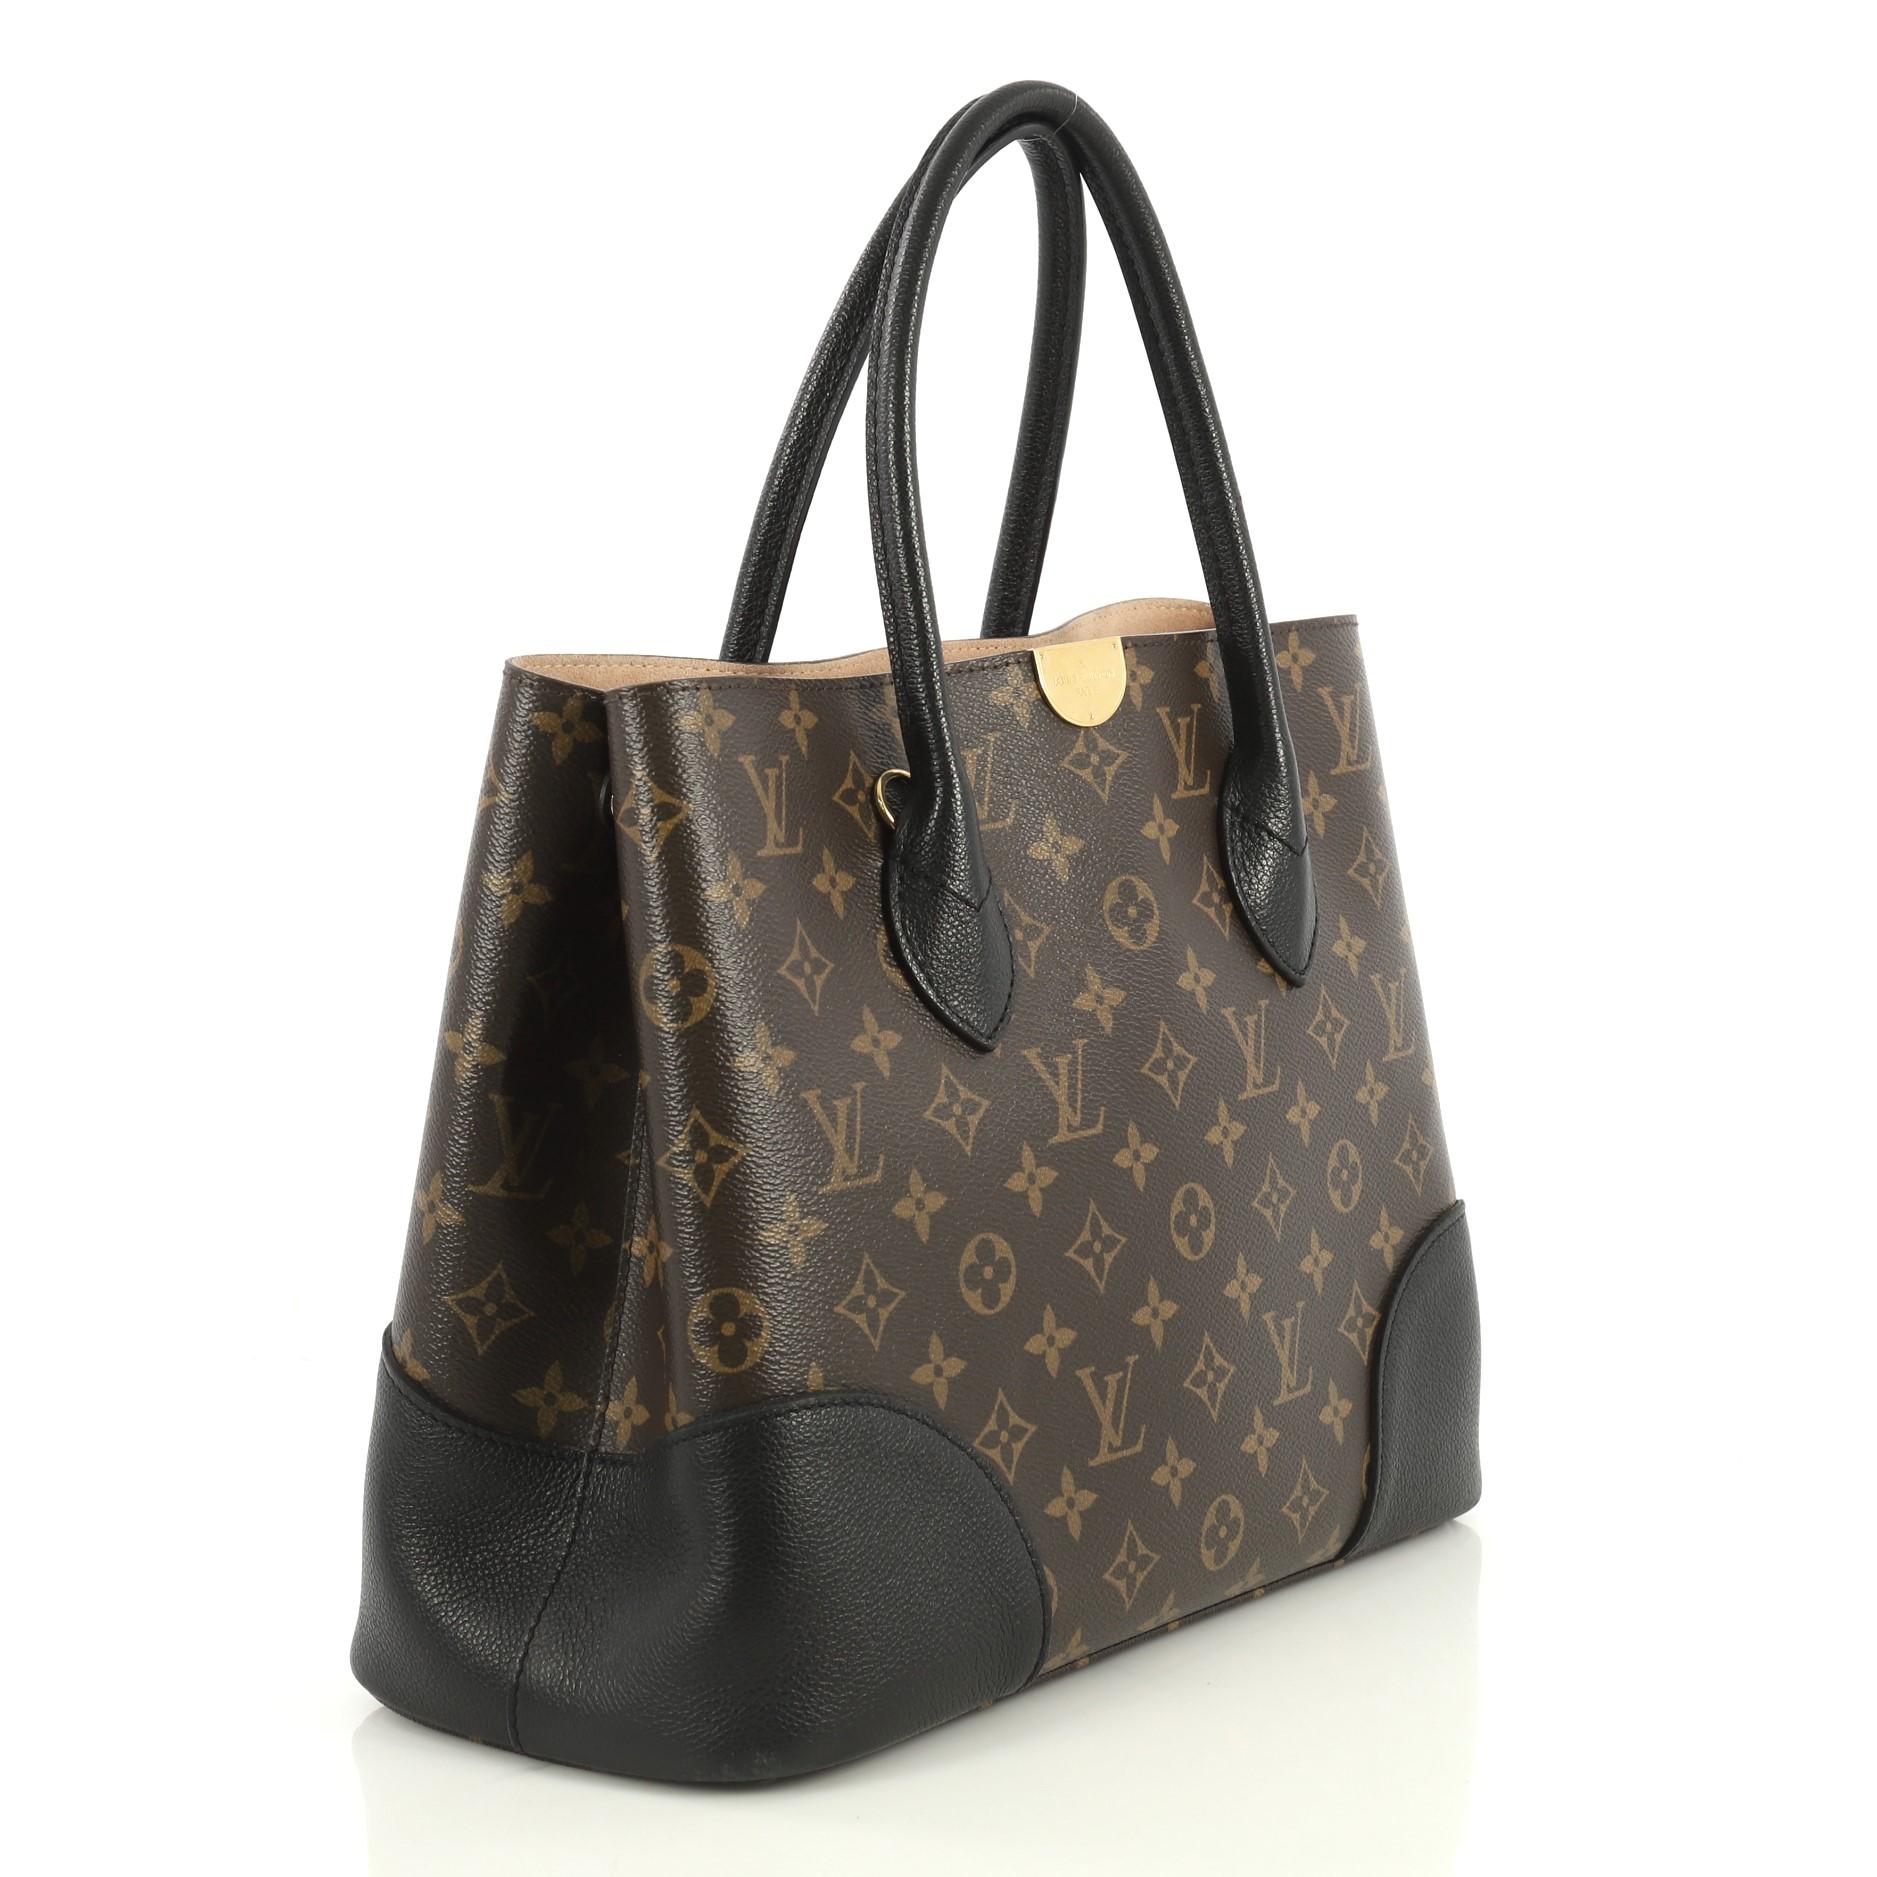 This Louis Vuitton Flandrin Handbag Monogram Canvas, crafted from brown monogram coated canvas, features dual rolled leather handles and gold-tone hardware. It opens to a neutral microfiber interior with a center zip compartment. Authenticity code